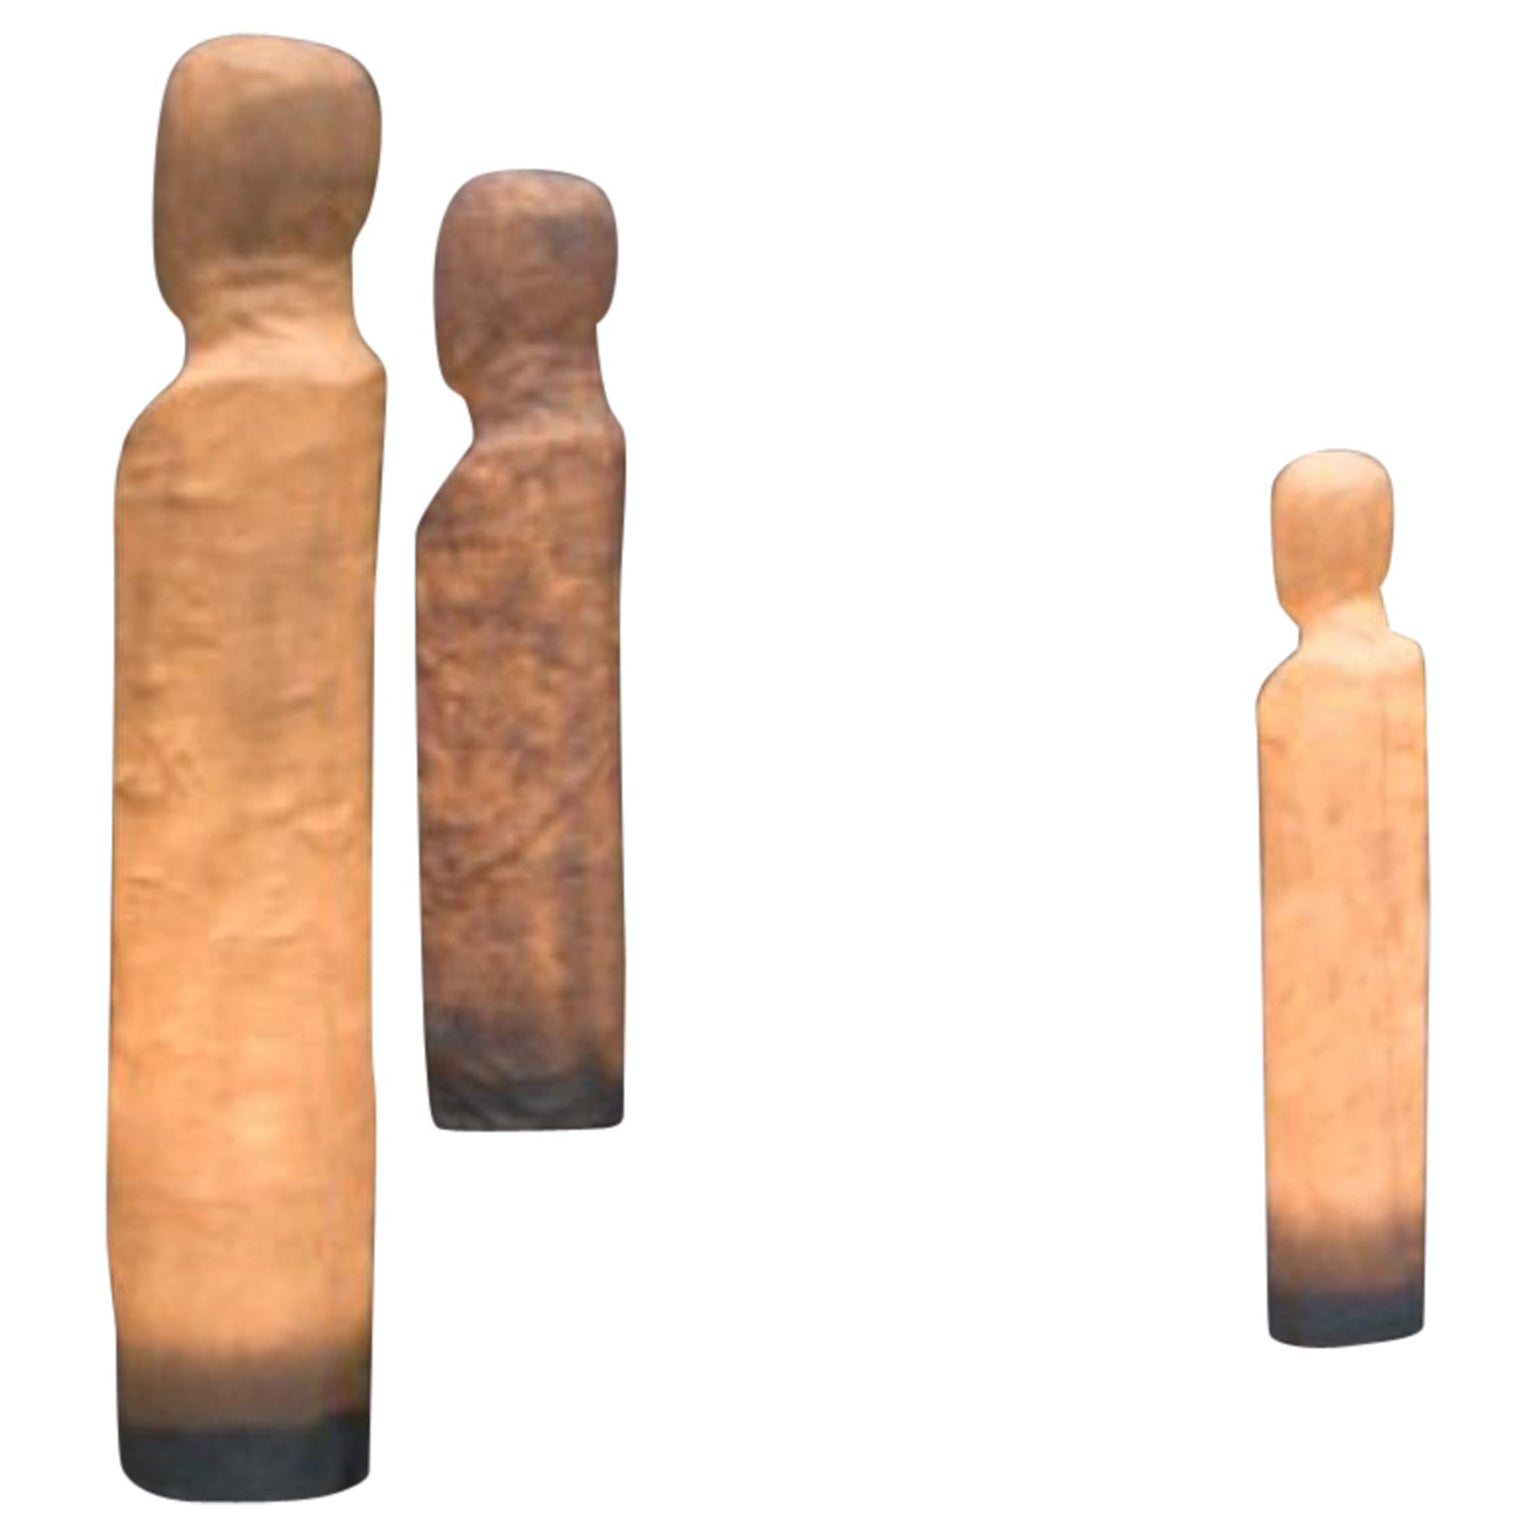 Set of 3 Anonymus Family Light Sculptures by Atelier Haute Cuisine For Sale